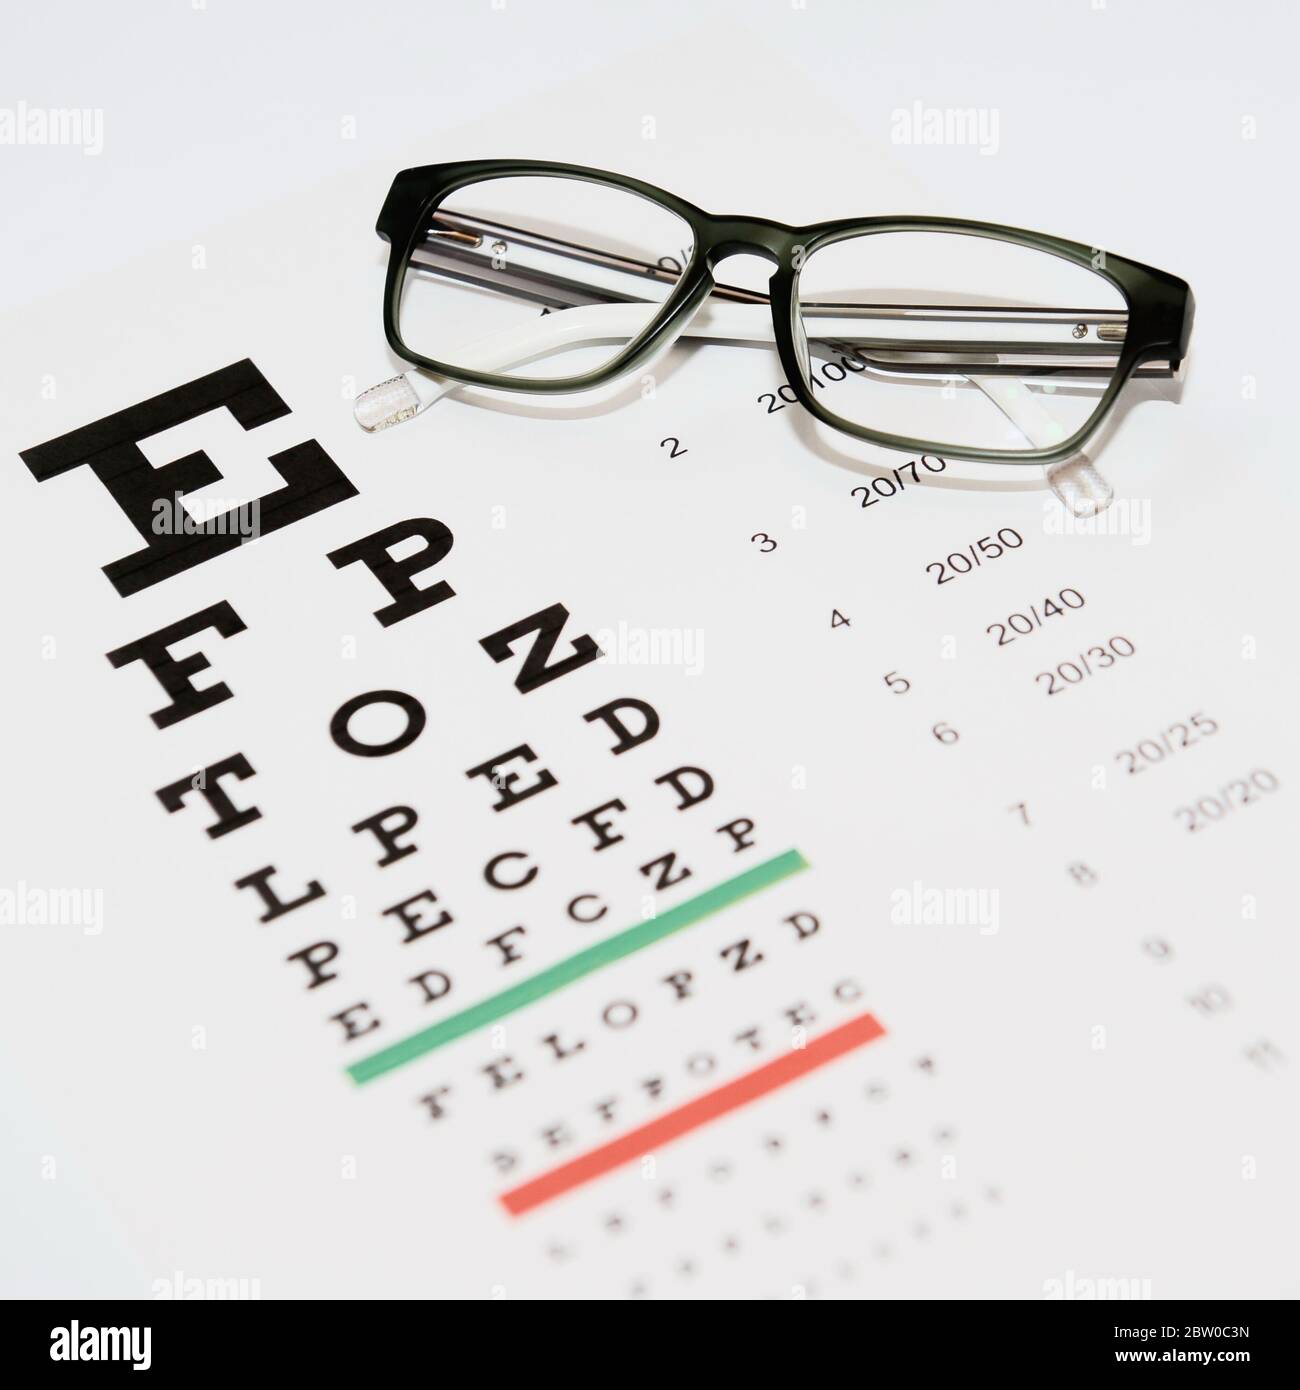 Spectacles in folded state on table to check visual acuity Stock Photo